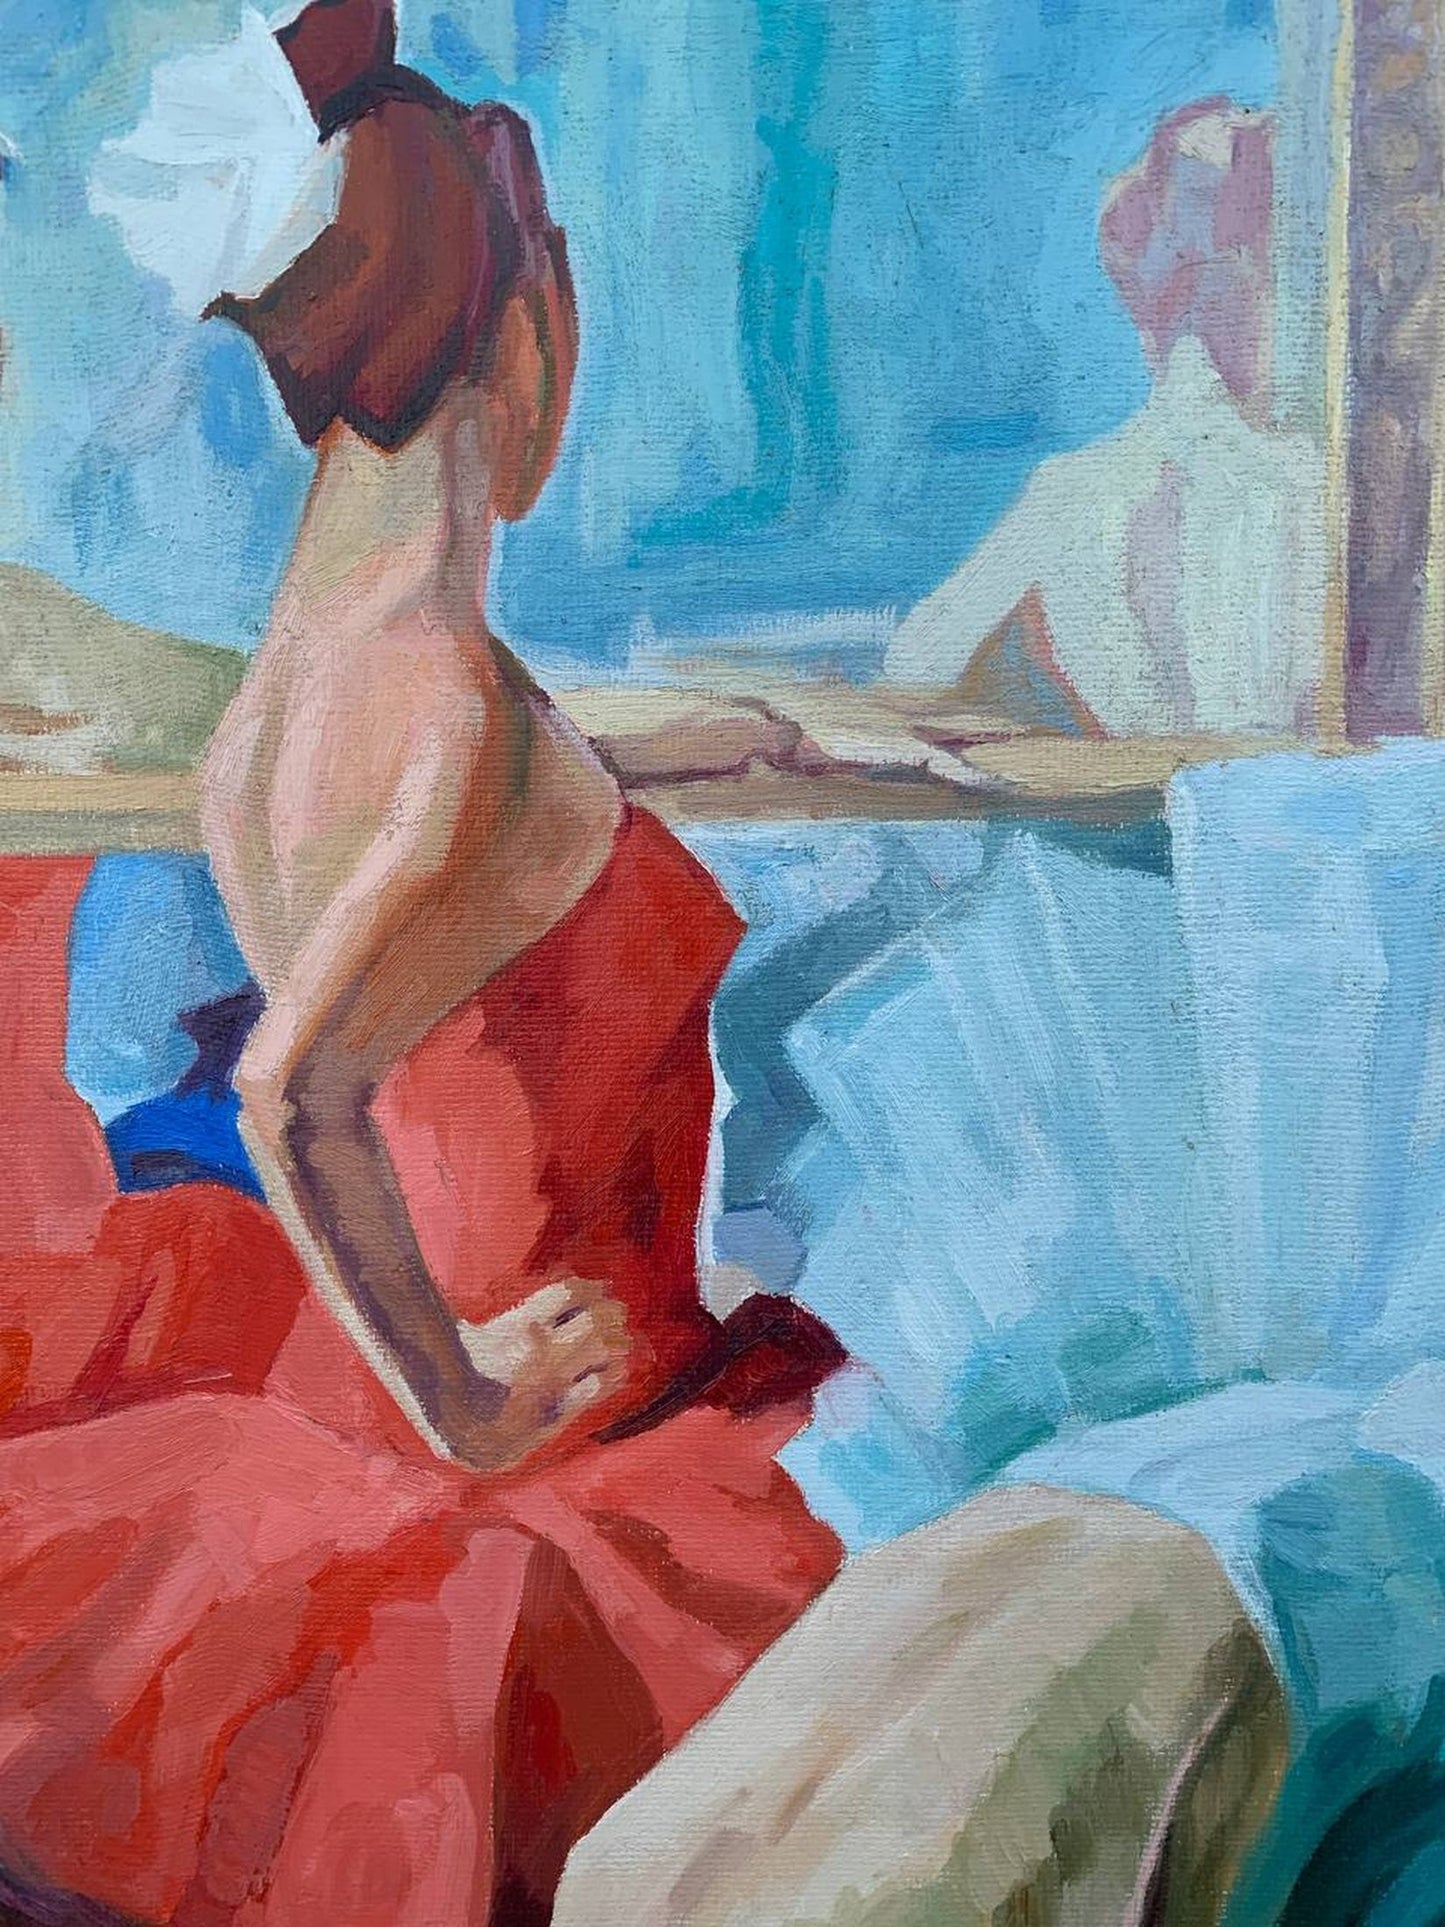 In L.K.'s oil painting, the beauty of ballerinas is portrayed with skillful brushwork